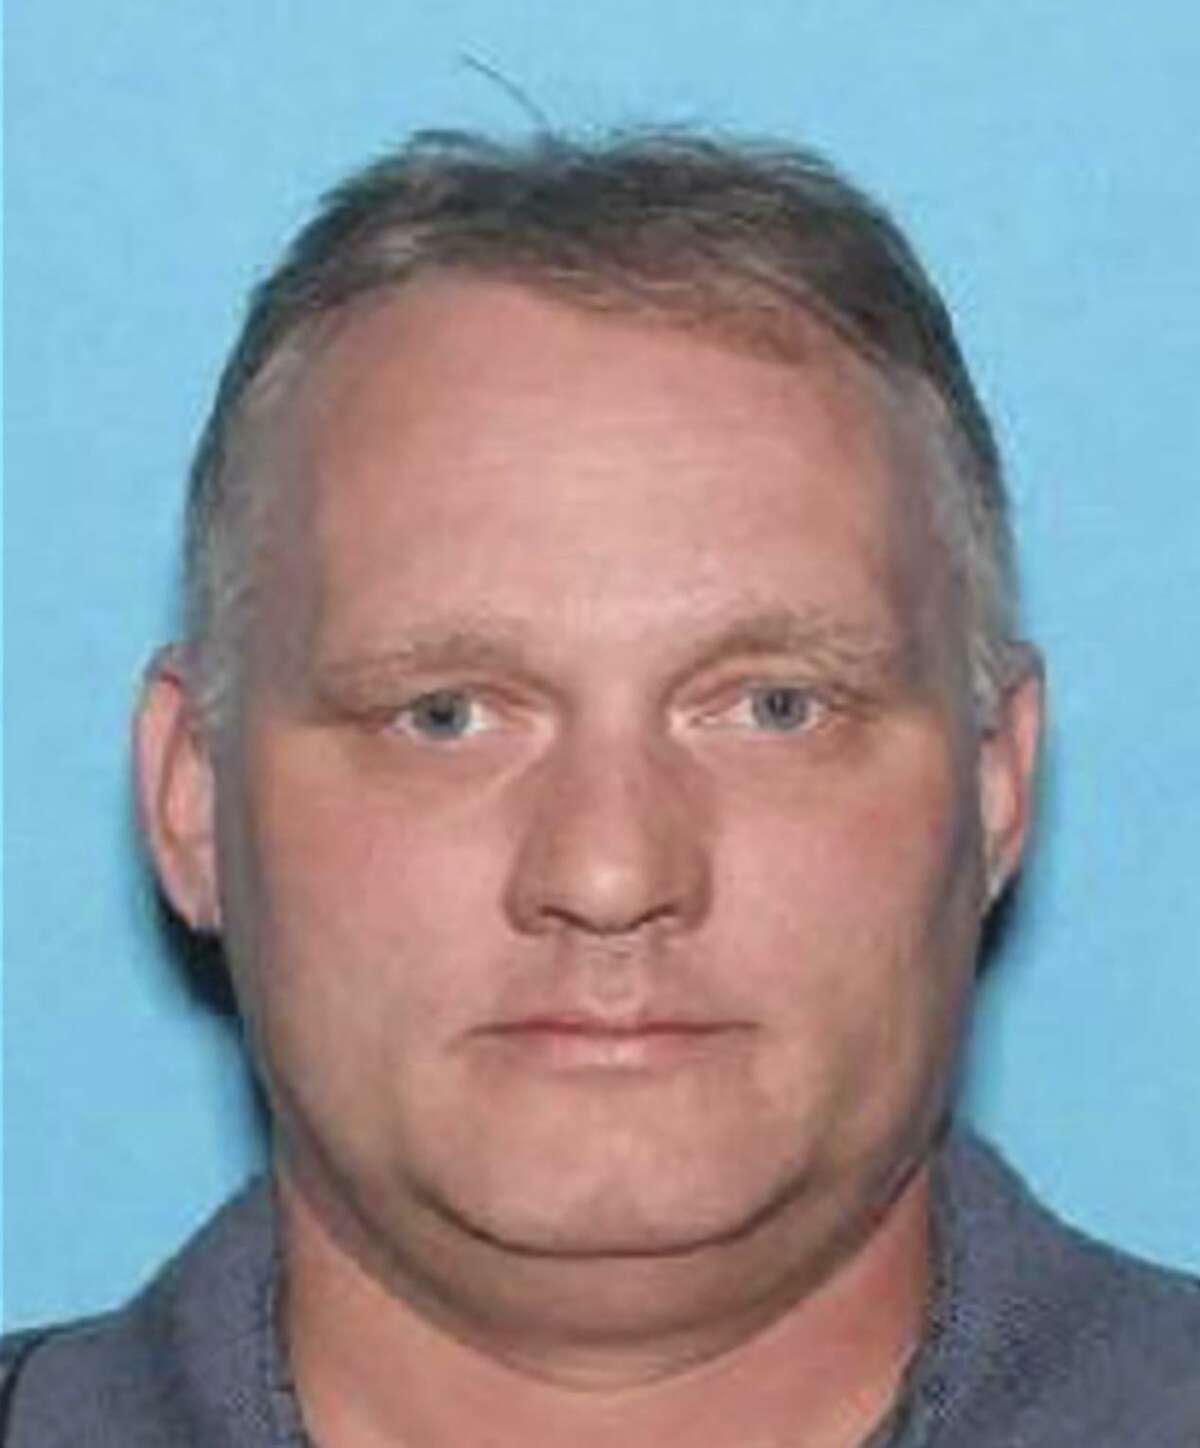 A photo provided by the Pennsylvania Department of Motor Vehicles shows Robert Bowers, who is accused a shooting rampage that left 11 people dead at the Tree of Life Congregation in Pittsburgh. Bowers appeared at a federal courthouse in downtown Pittsburgh in a wheelchair on Oct. 29, 2018. The judge listed an overview of the 29 criminal charges against him and asked him if he understood them. ?“Yes,?” he replied. (Pennsylvania Department of Motor Vehicles via The New York Times) -- FOR EDITORIAL USE ONLY. --